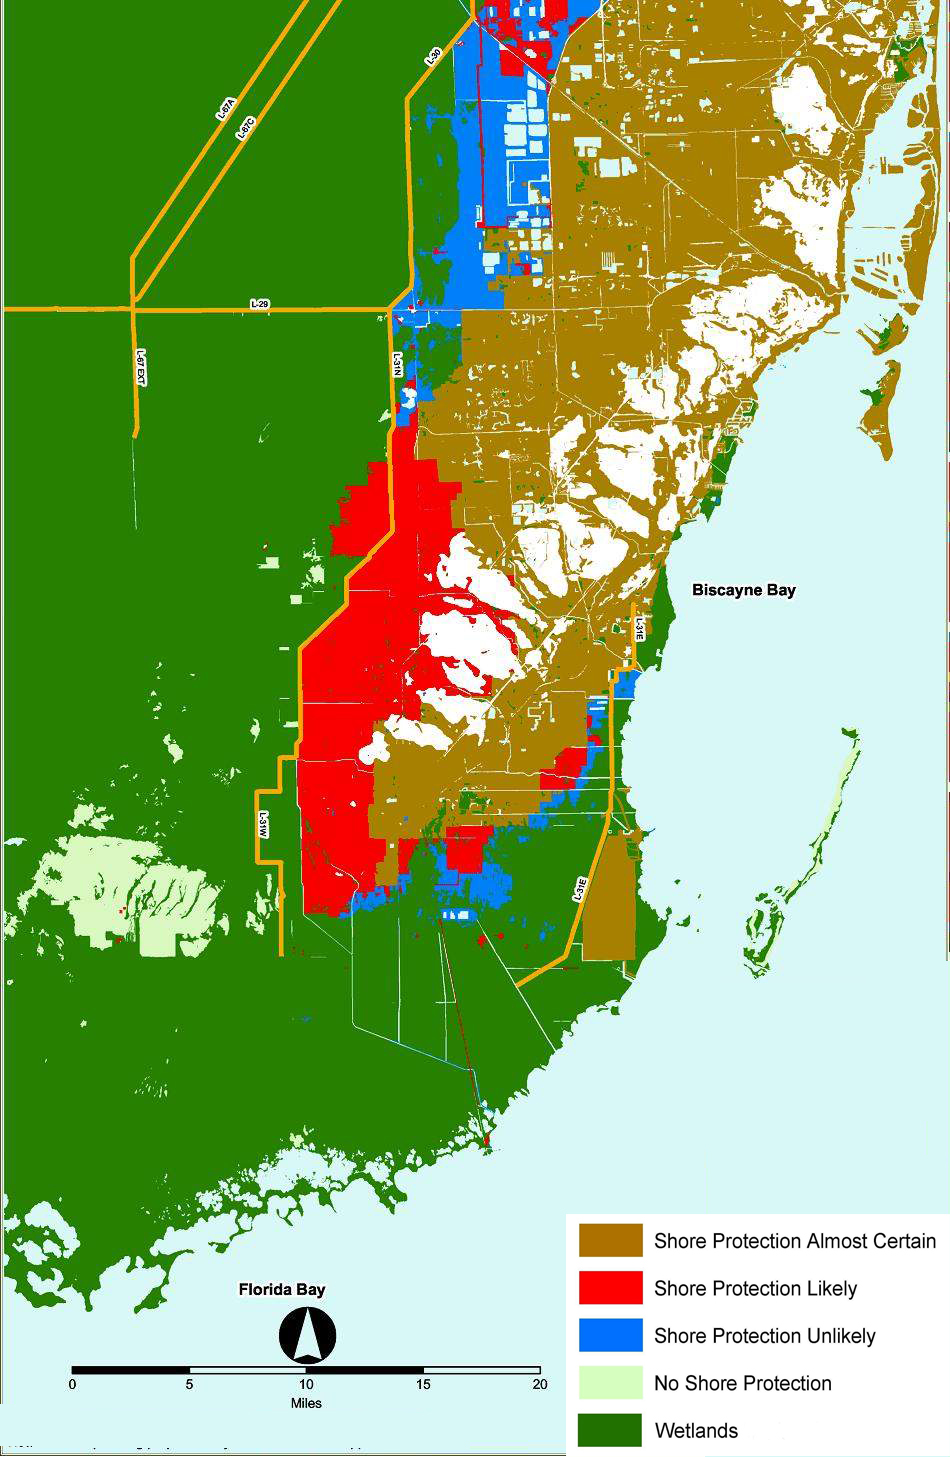 Miami-Dade County, Florida sea level rise planning map